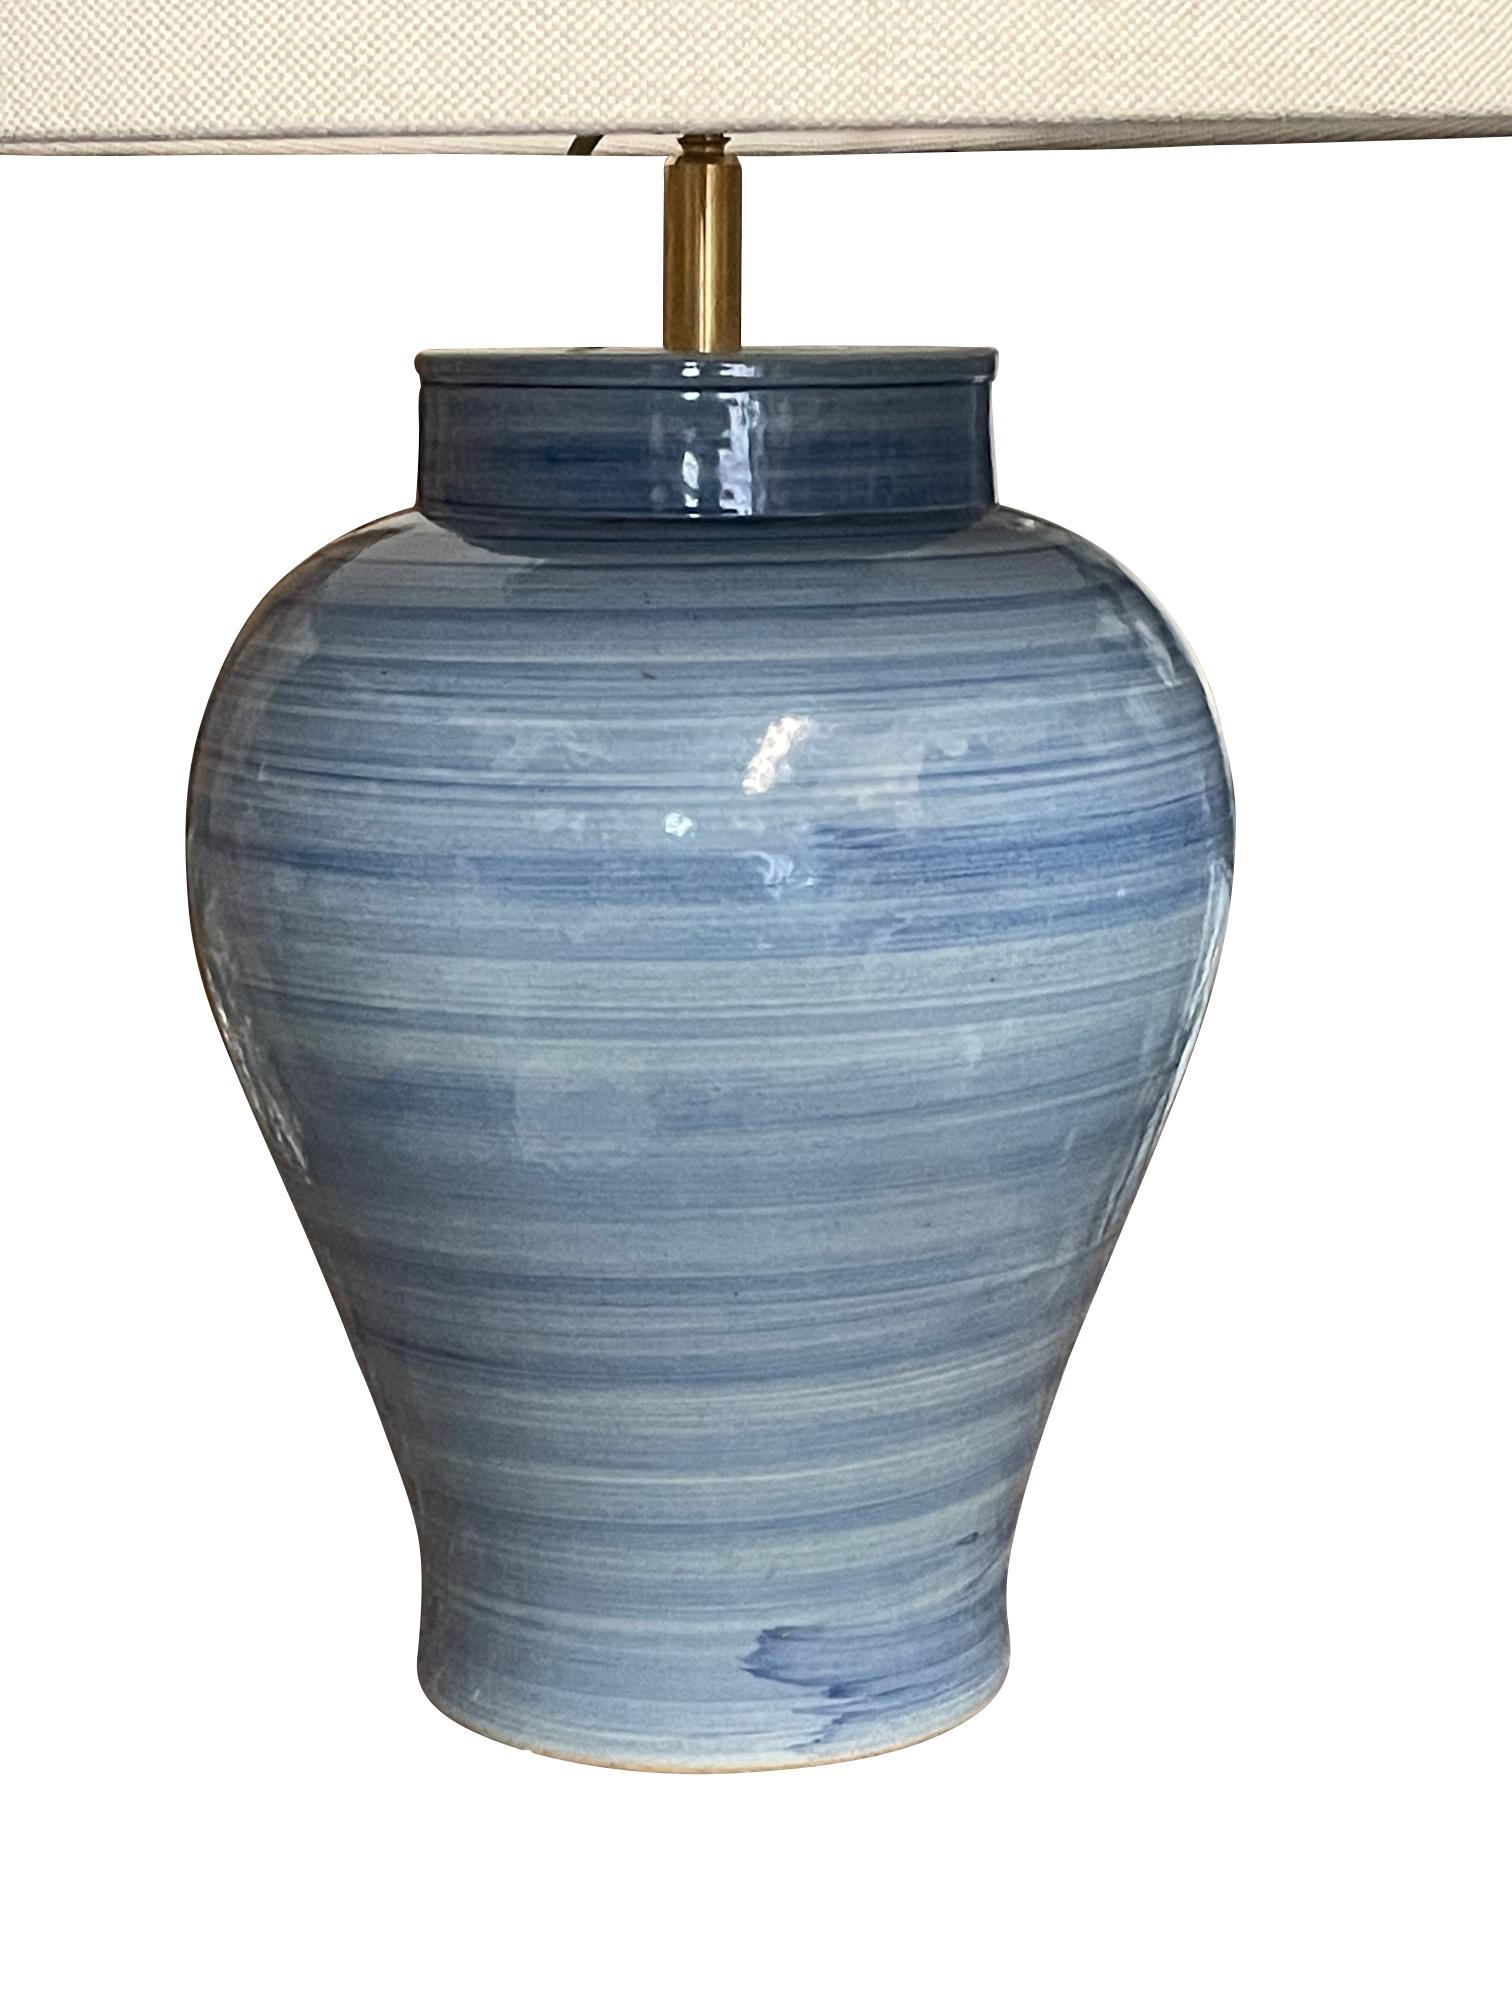 Contemporary Chinese pair of blue lamps with horizontal striated design.
Ginger jar shape design.
New Belgian linen shades
Newly wired
Overall height. 22